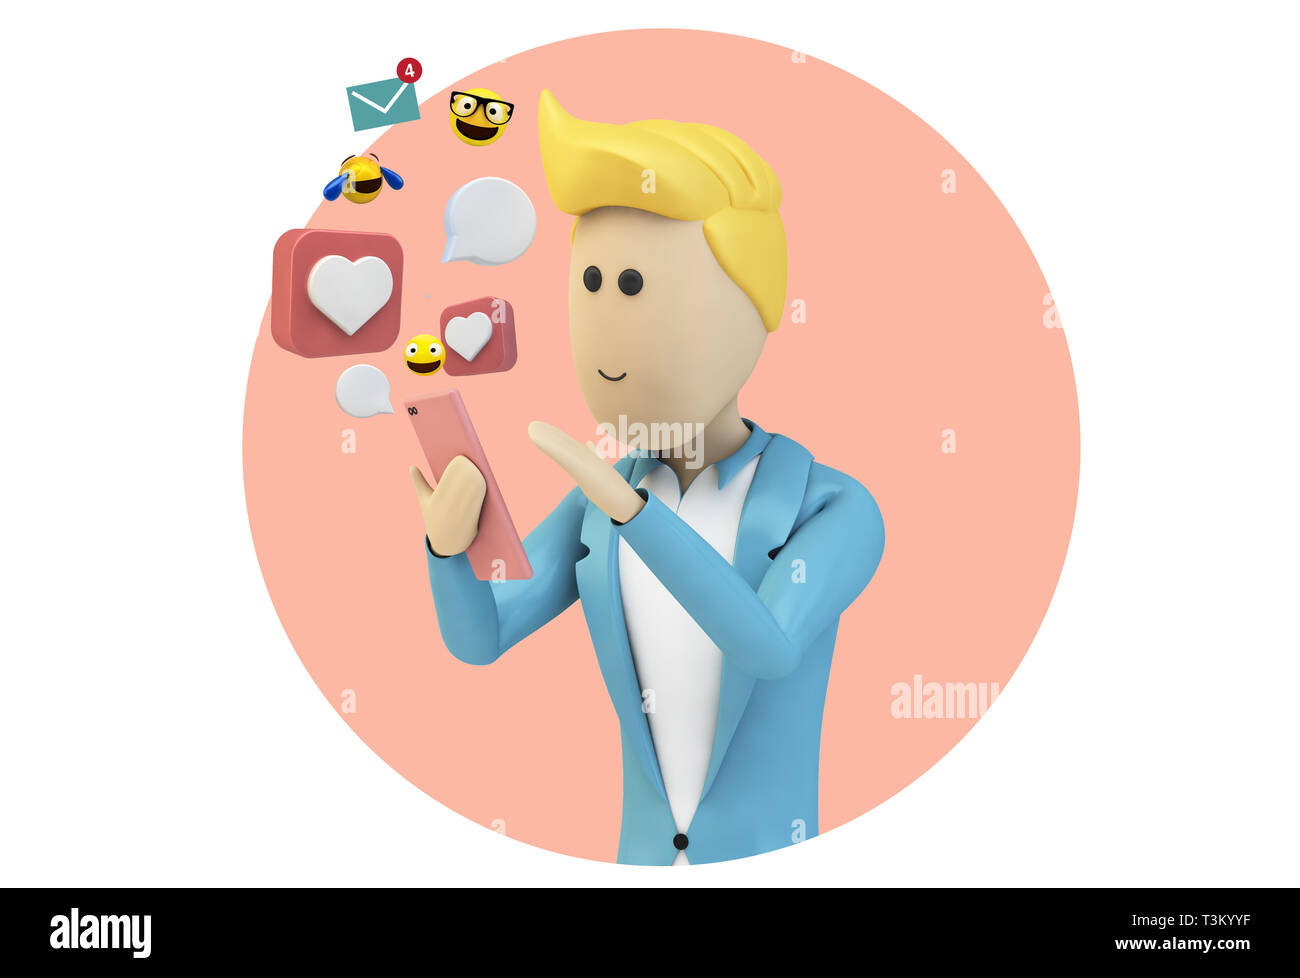 Male cartoon with blue suit character using smartphone isolated 3d rendering Stock Photo